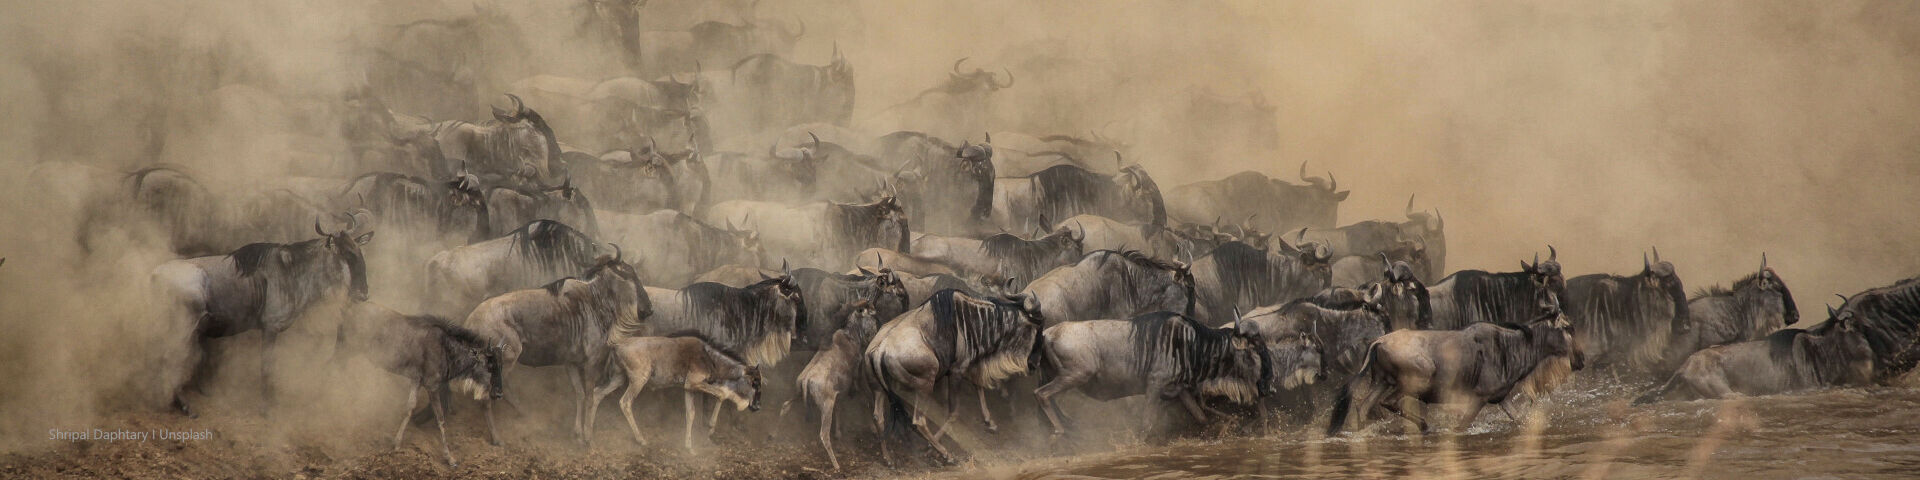 Banner A complete guide to the Great Wildebeest Migration Maasai Mara National Reserve Shripal Daphtary